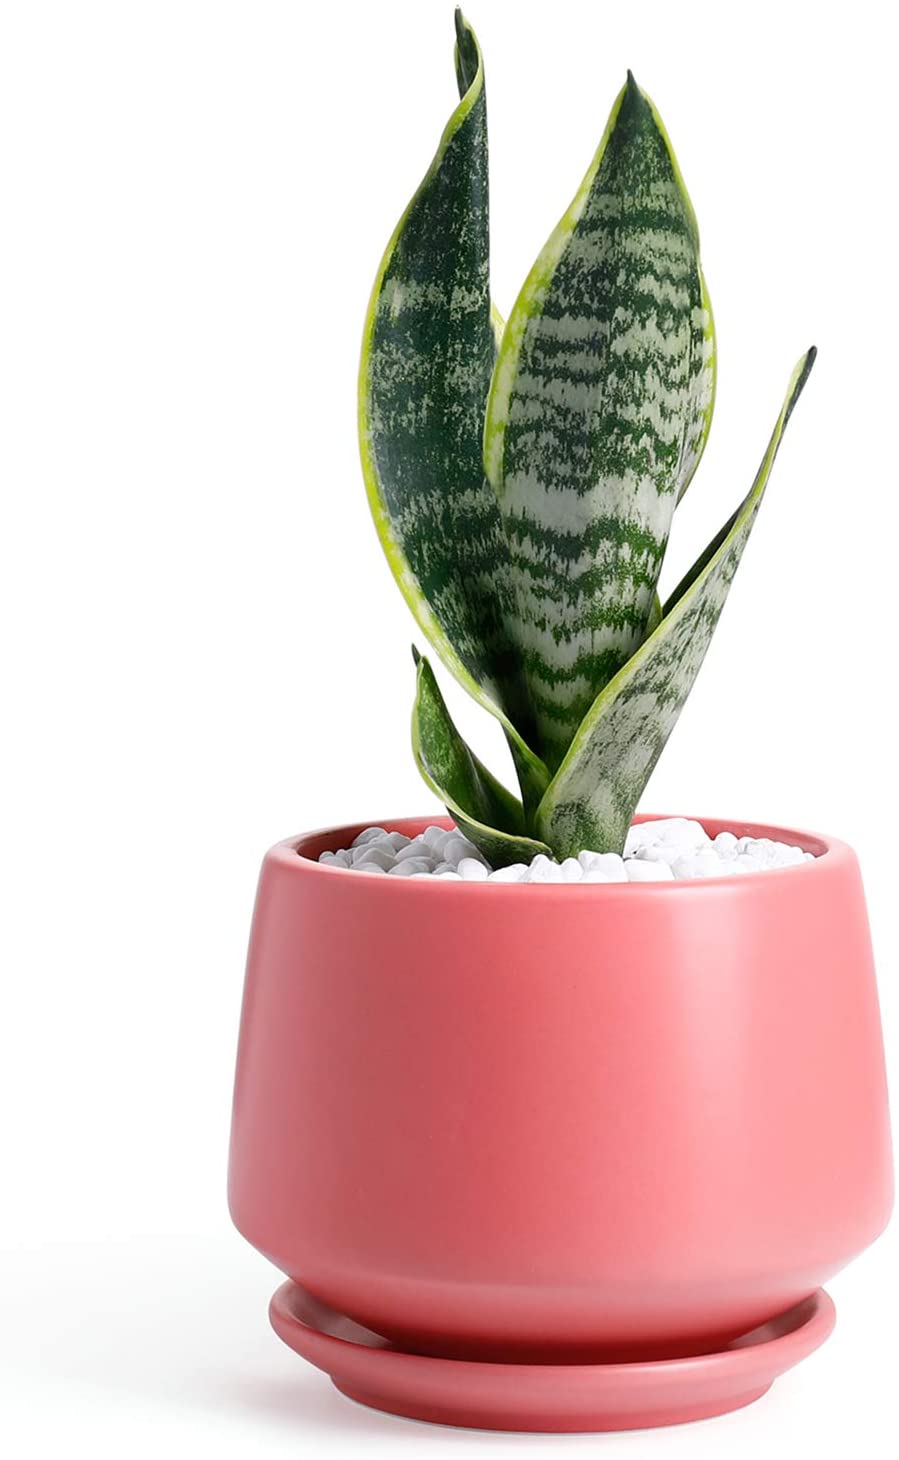 5.9 inch POTEY Ceramic Plant Pot with Drainage Hole (6 colors) $14.99